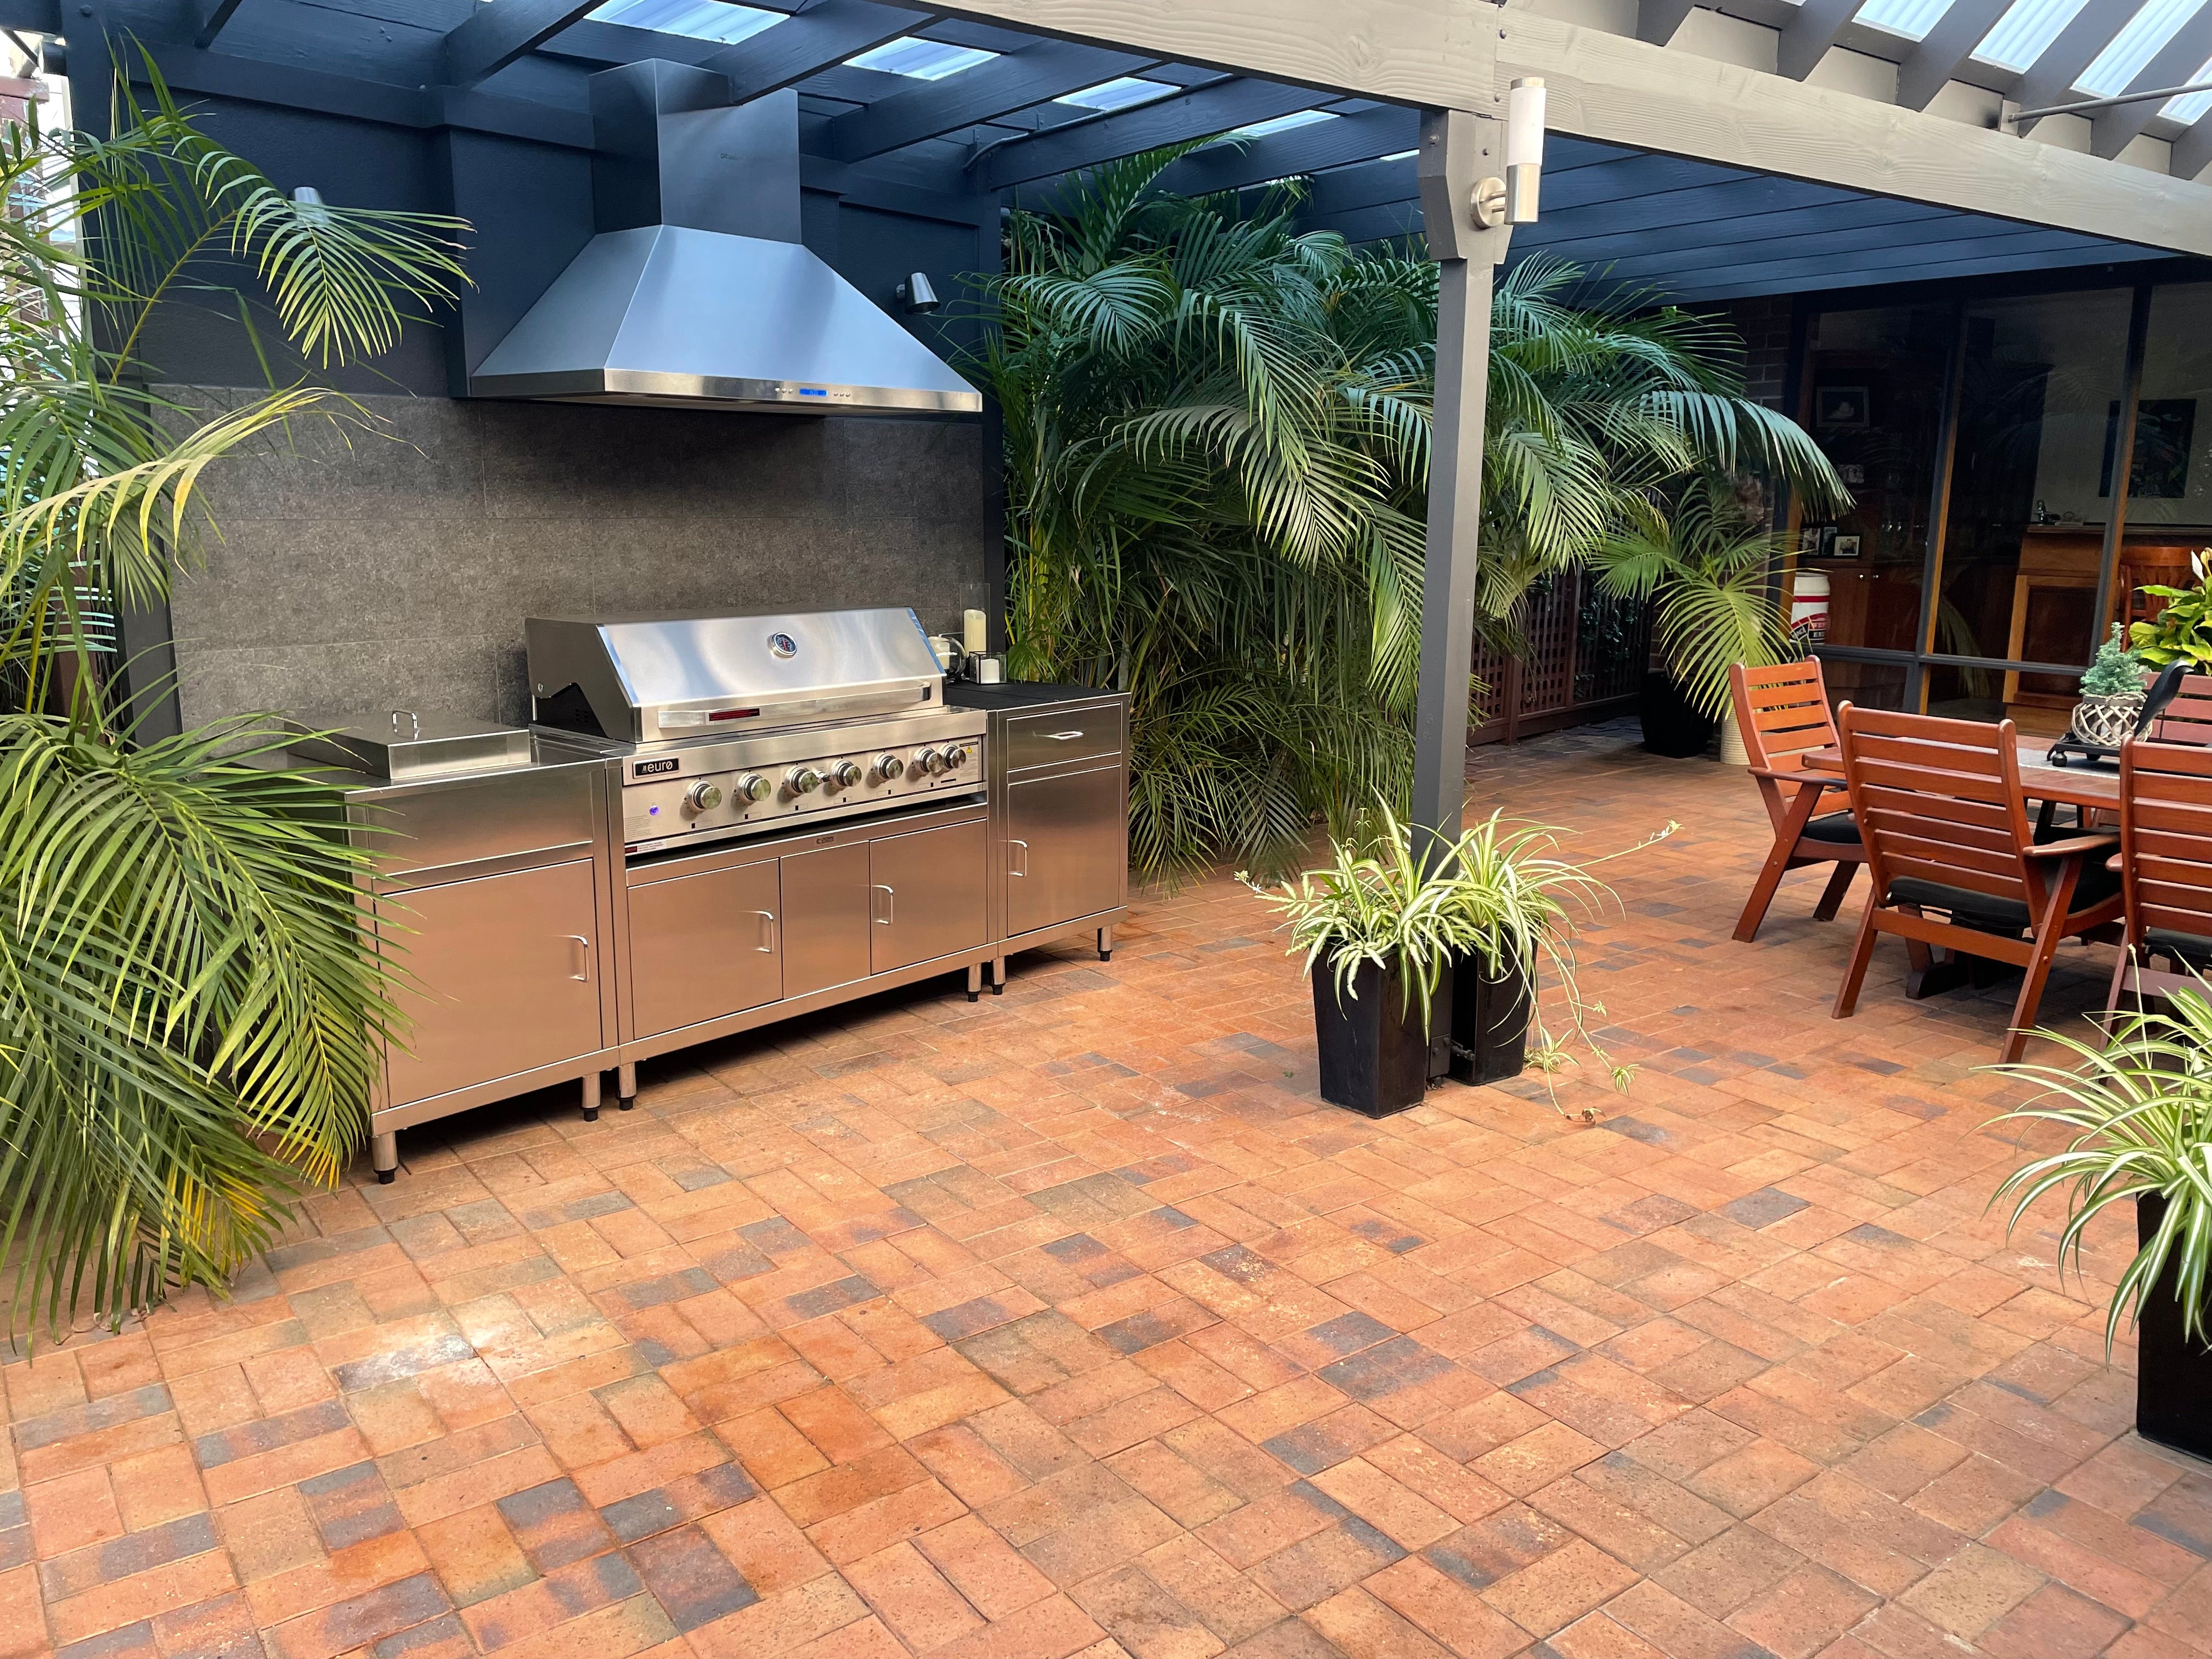 Stainless steel outdoor kitchen with 6 burner BBQ and side burner